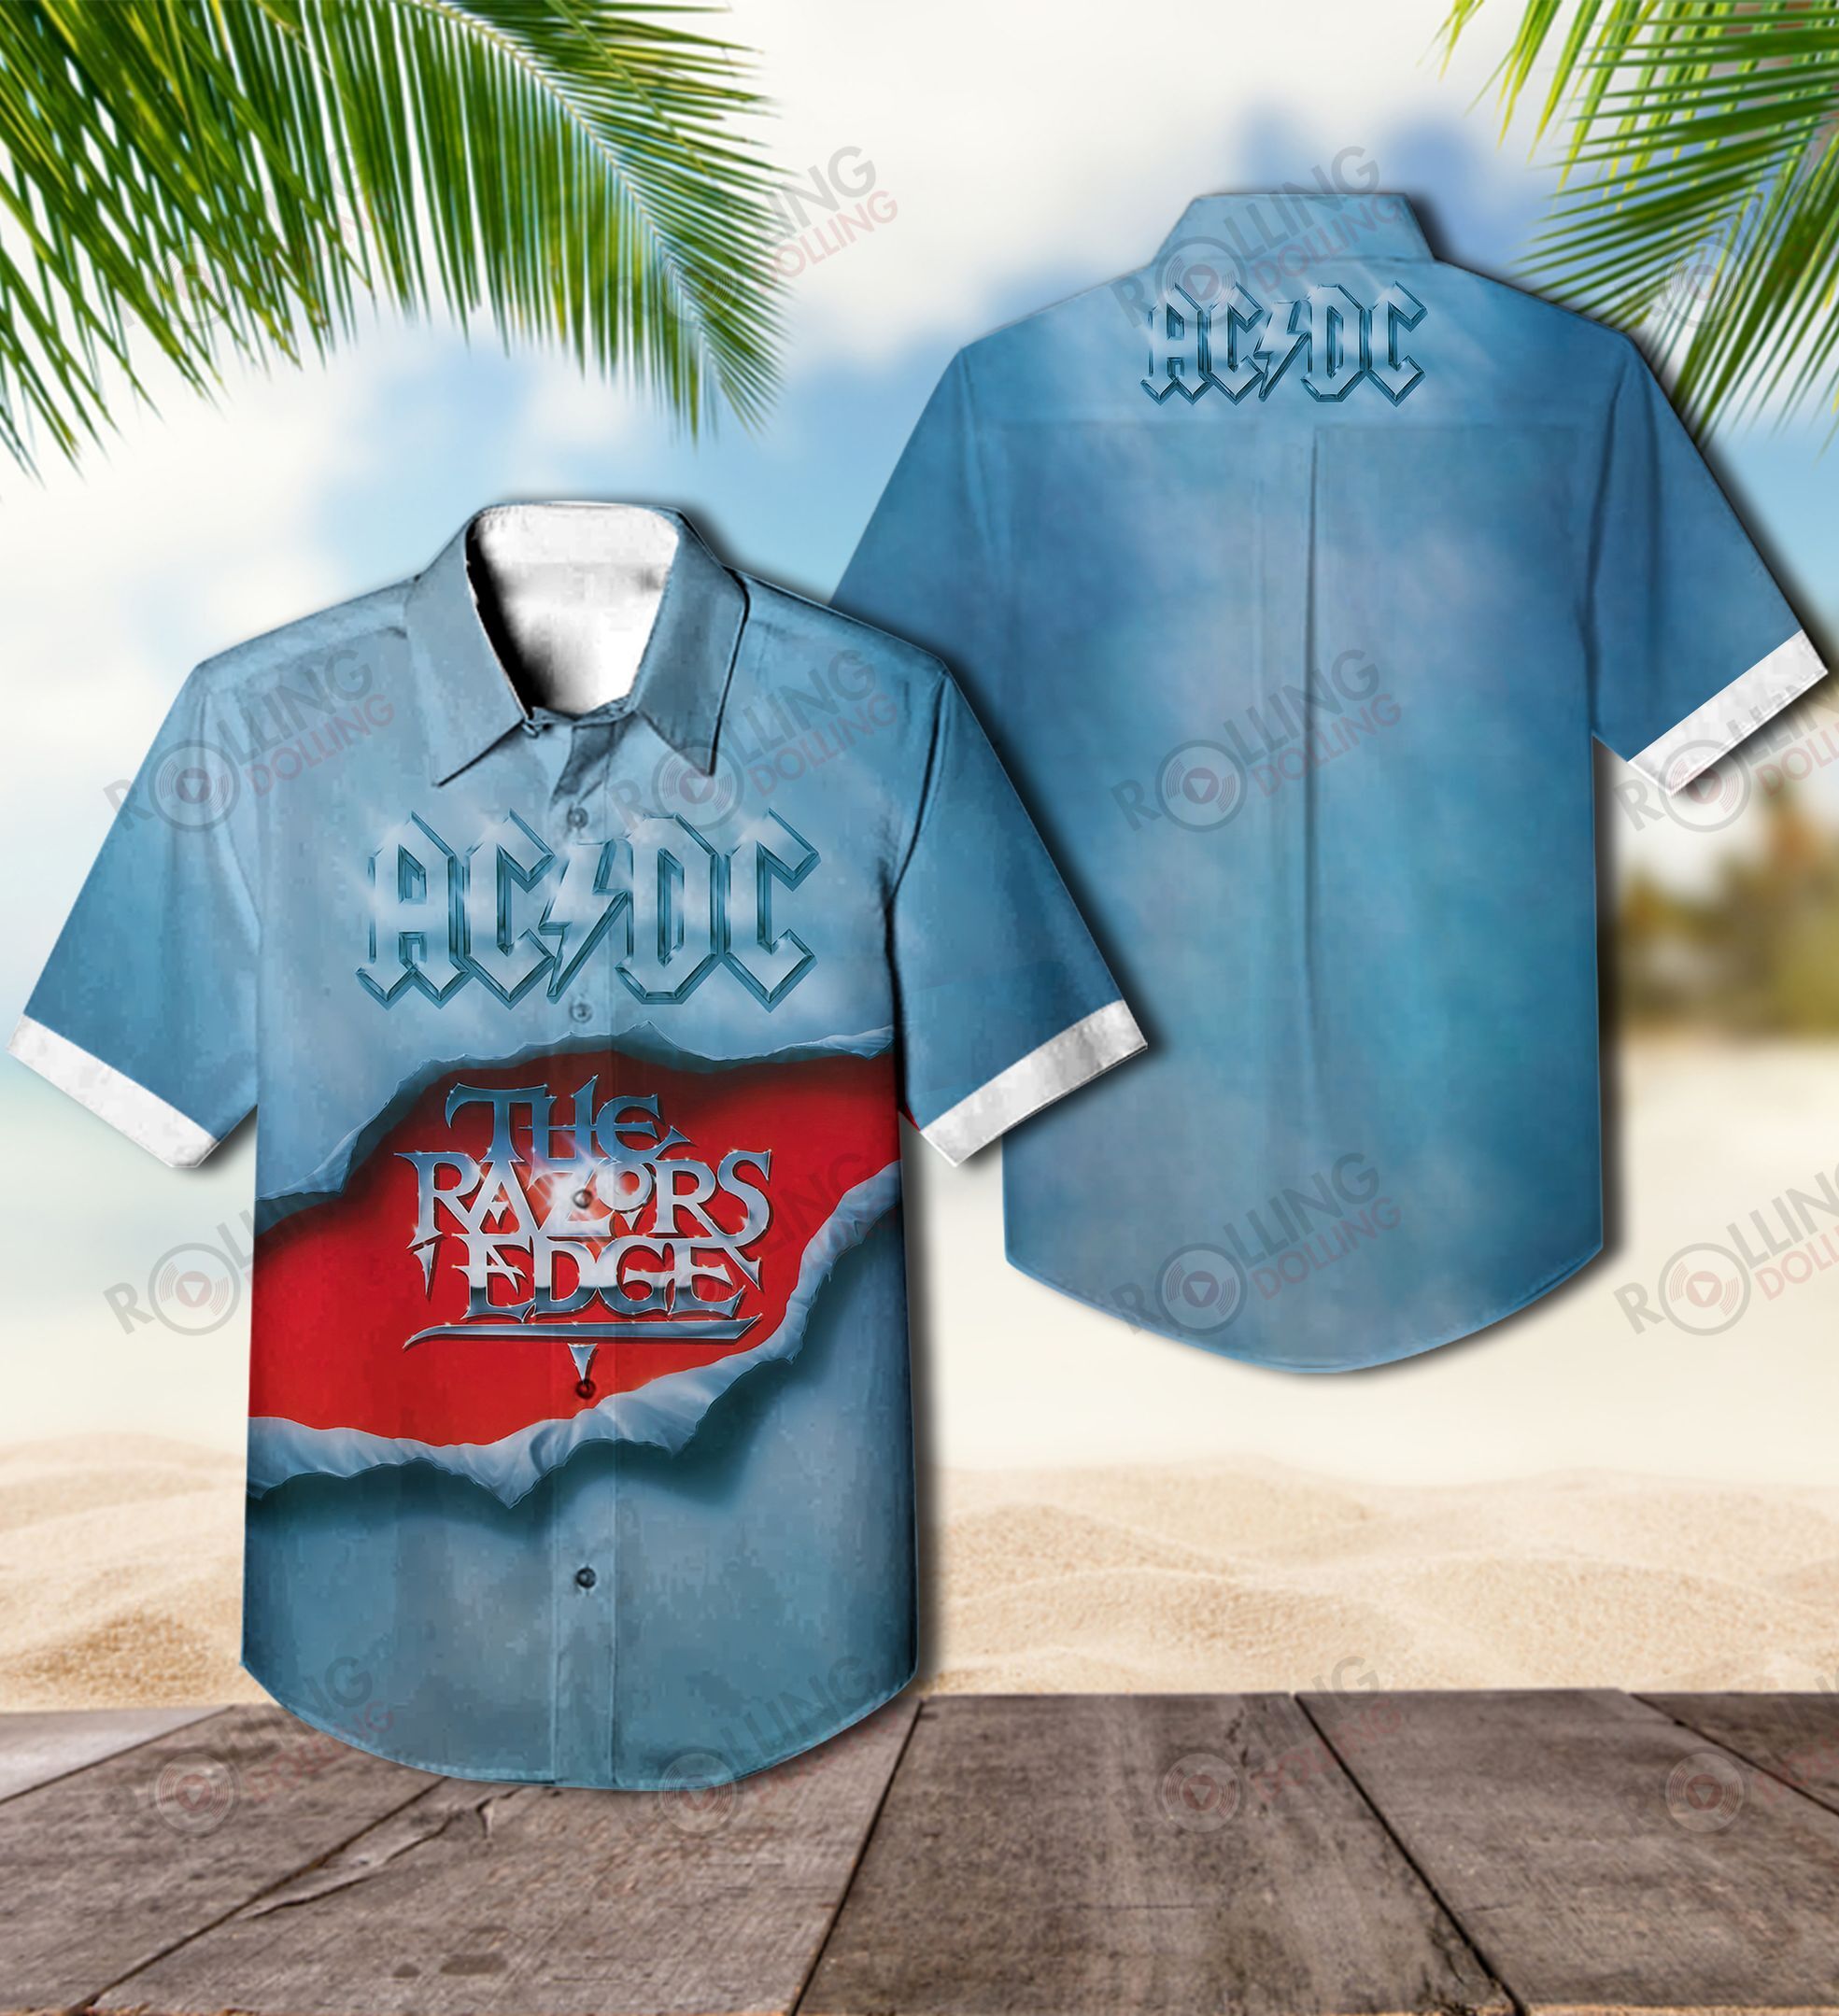 For summer, consider wearing This Amazing Hawaiian Shirt shirt in our store 134